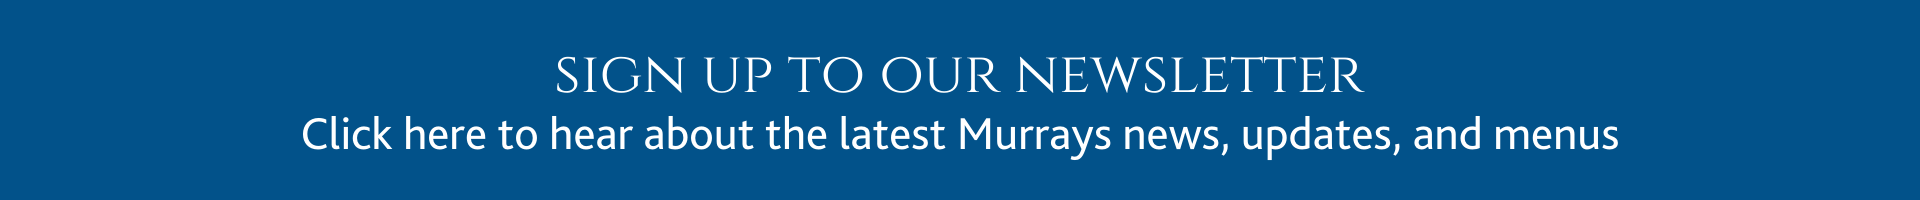 Sign up to our newsletter to hear the latest news, updates and menus from Murrays